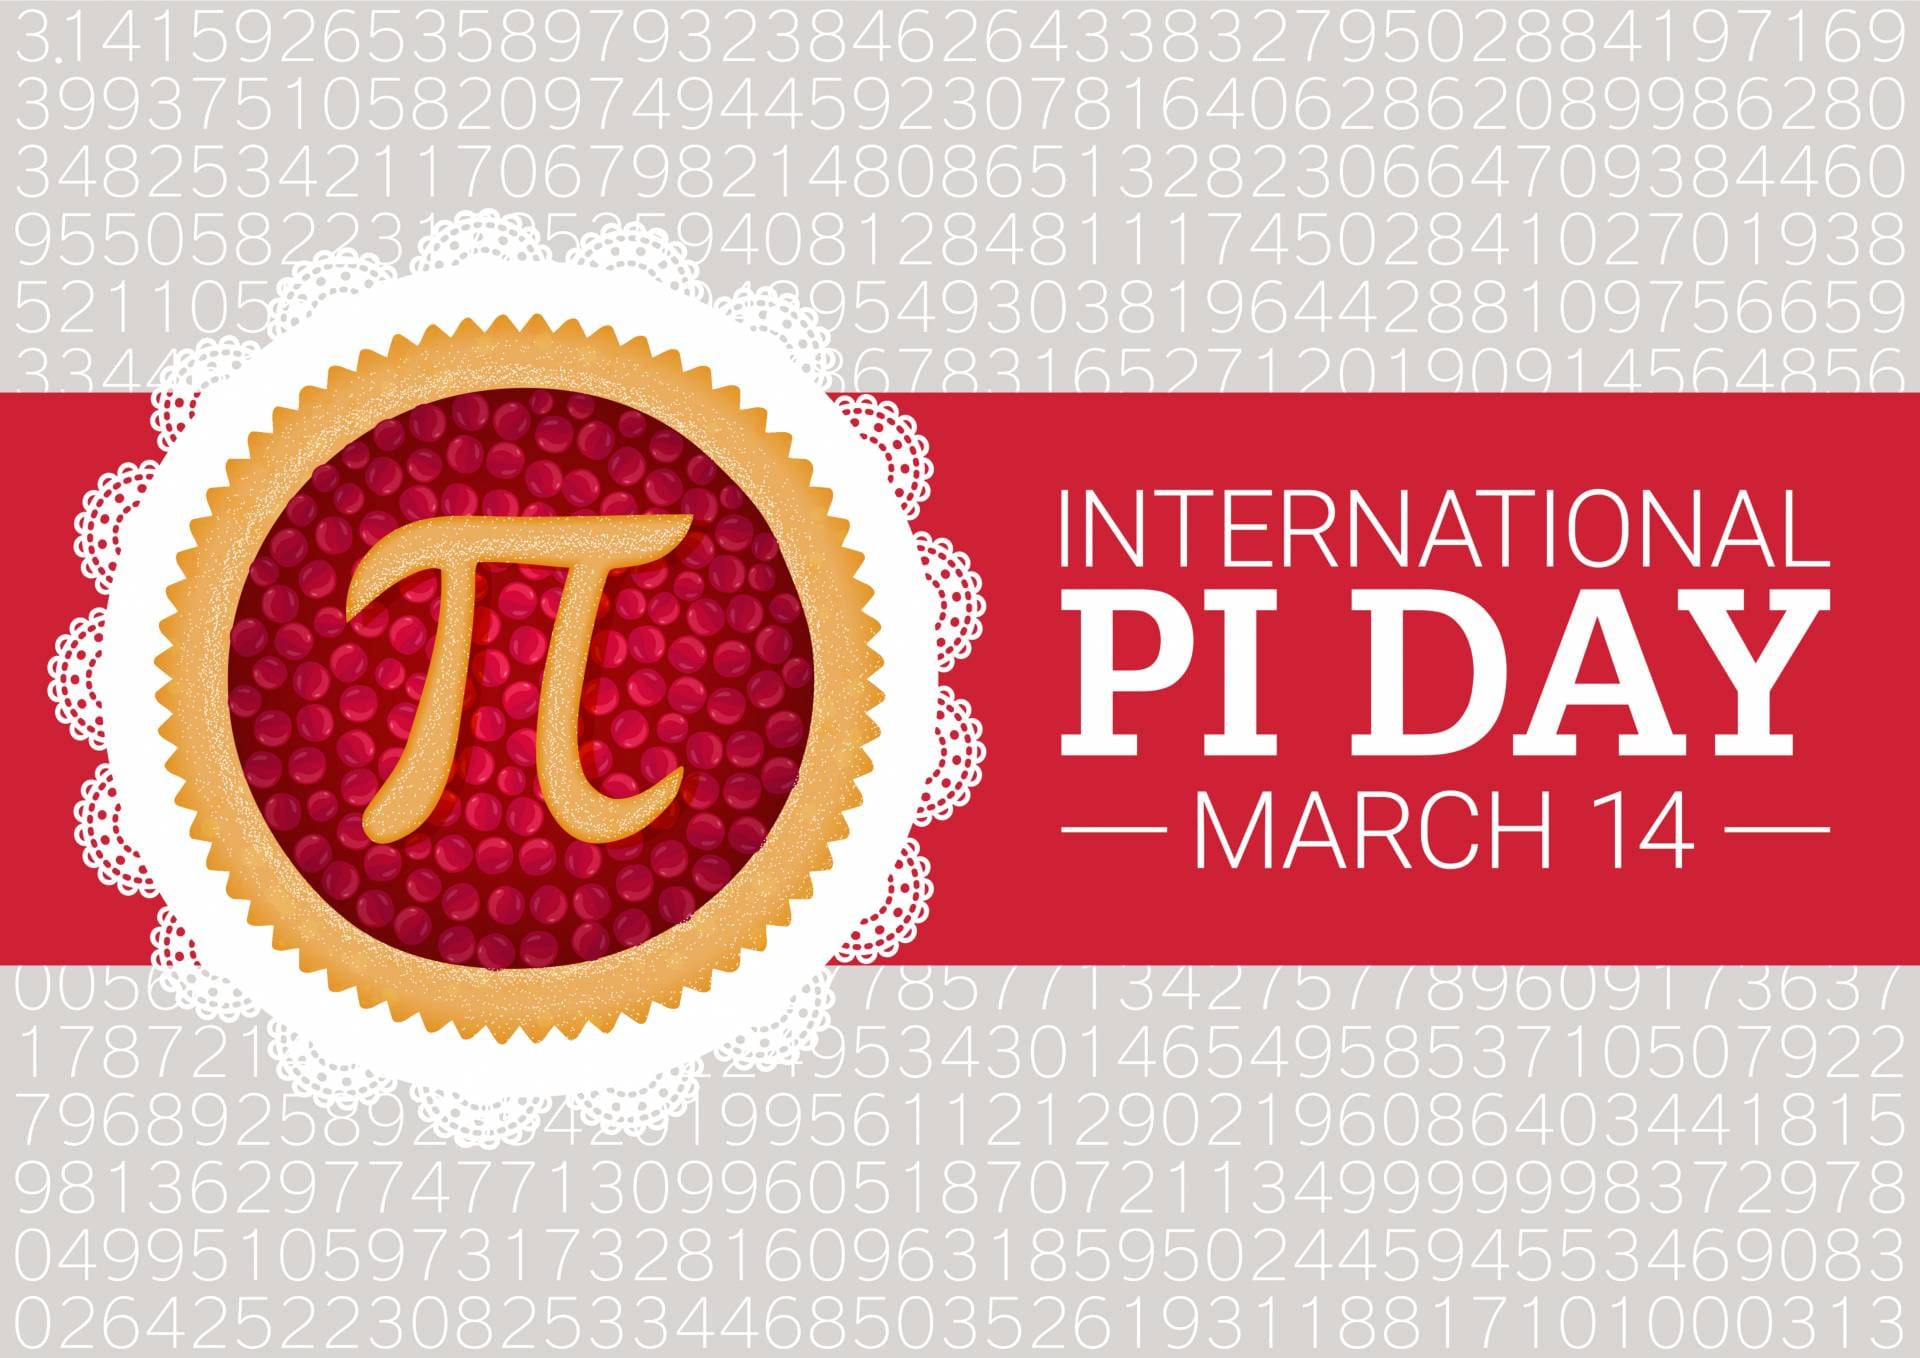 International pi day is March 14th